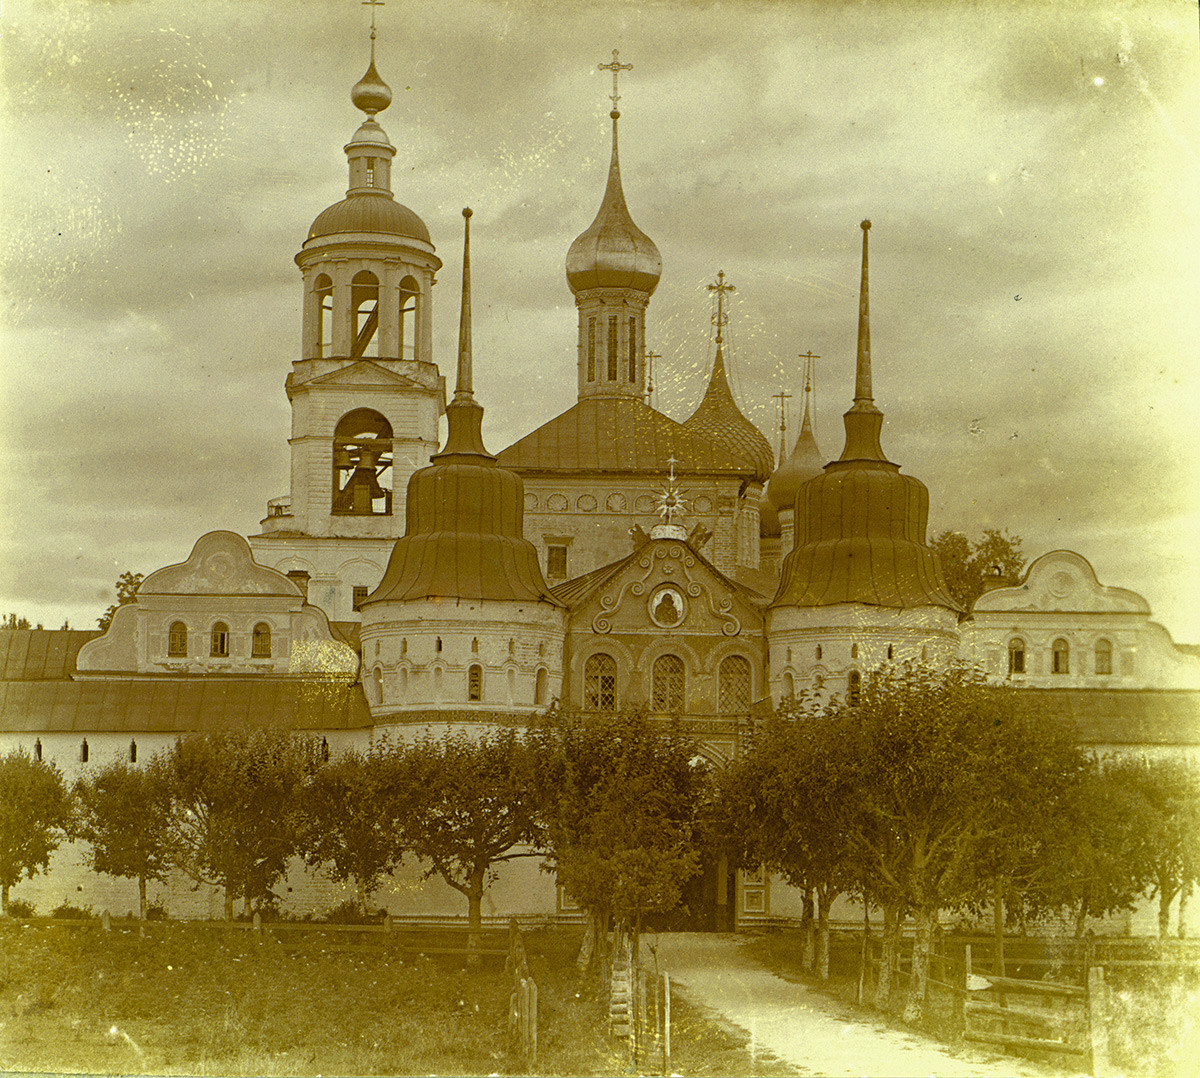 Holy Gate & Church of St. Nicholas. West view. 1910